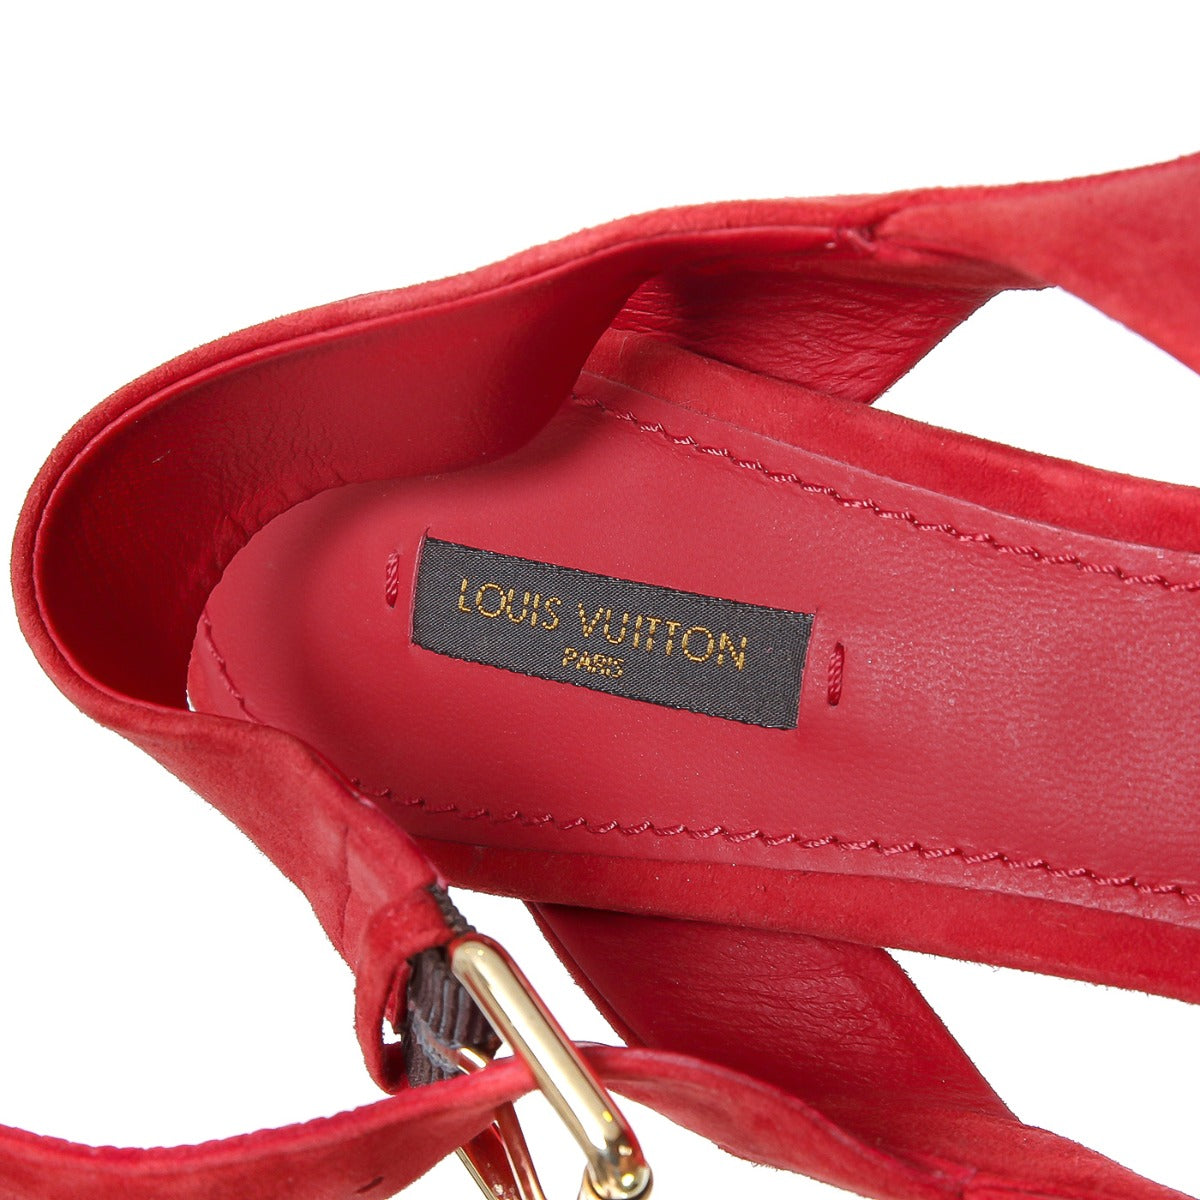 Sandals Louis Vuitton Red size 40.5 EU in Rubber - 37420536